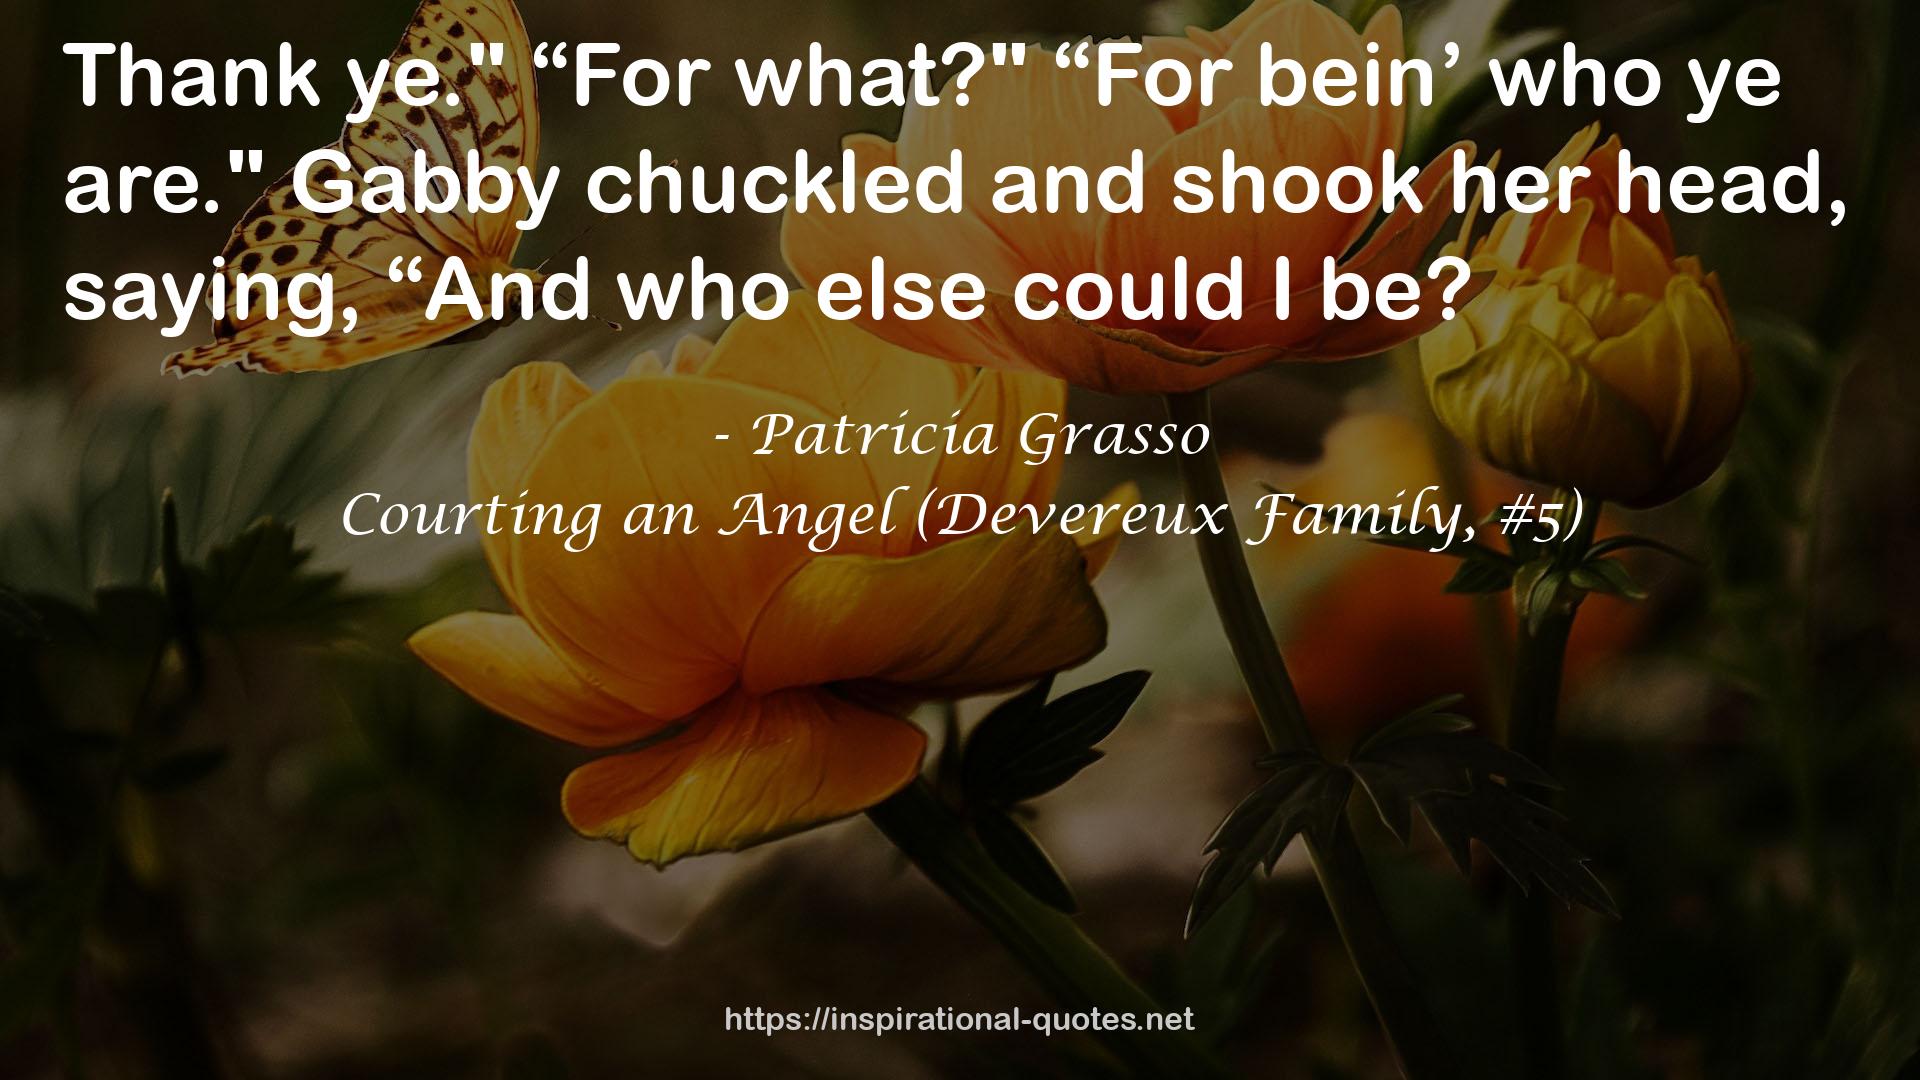 Courting an Angel (Devereux Family, #5) QUOTES